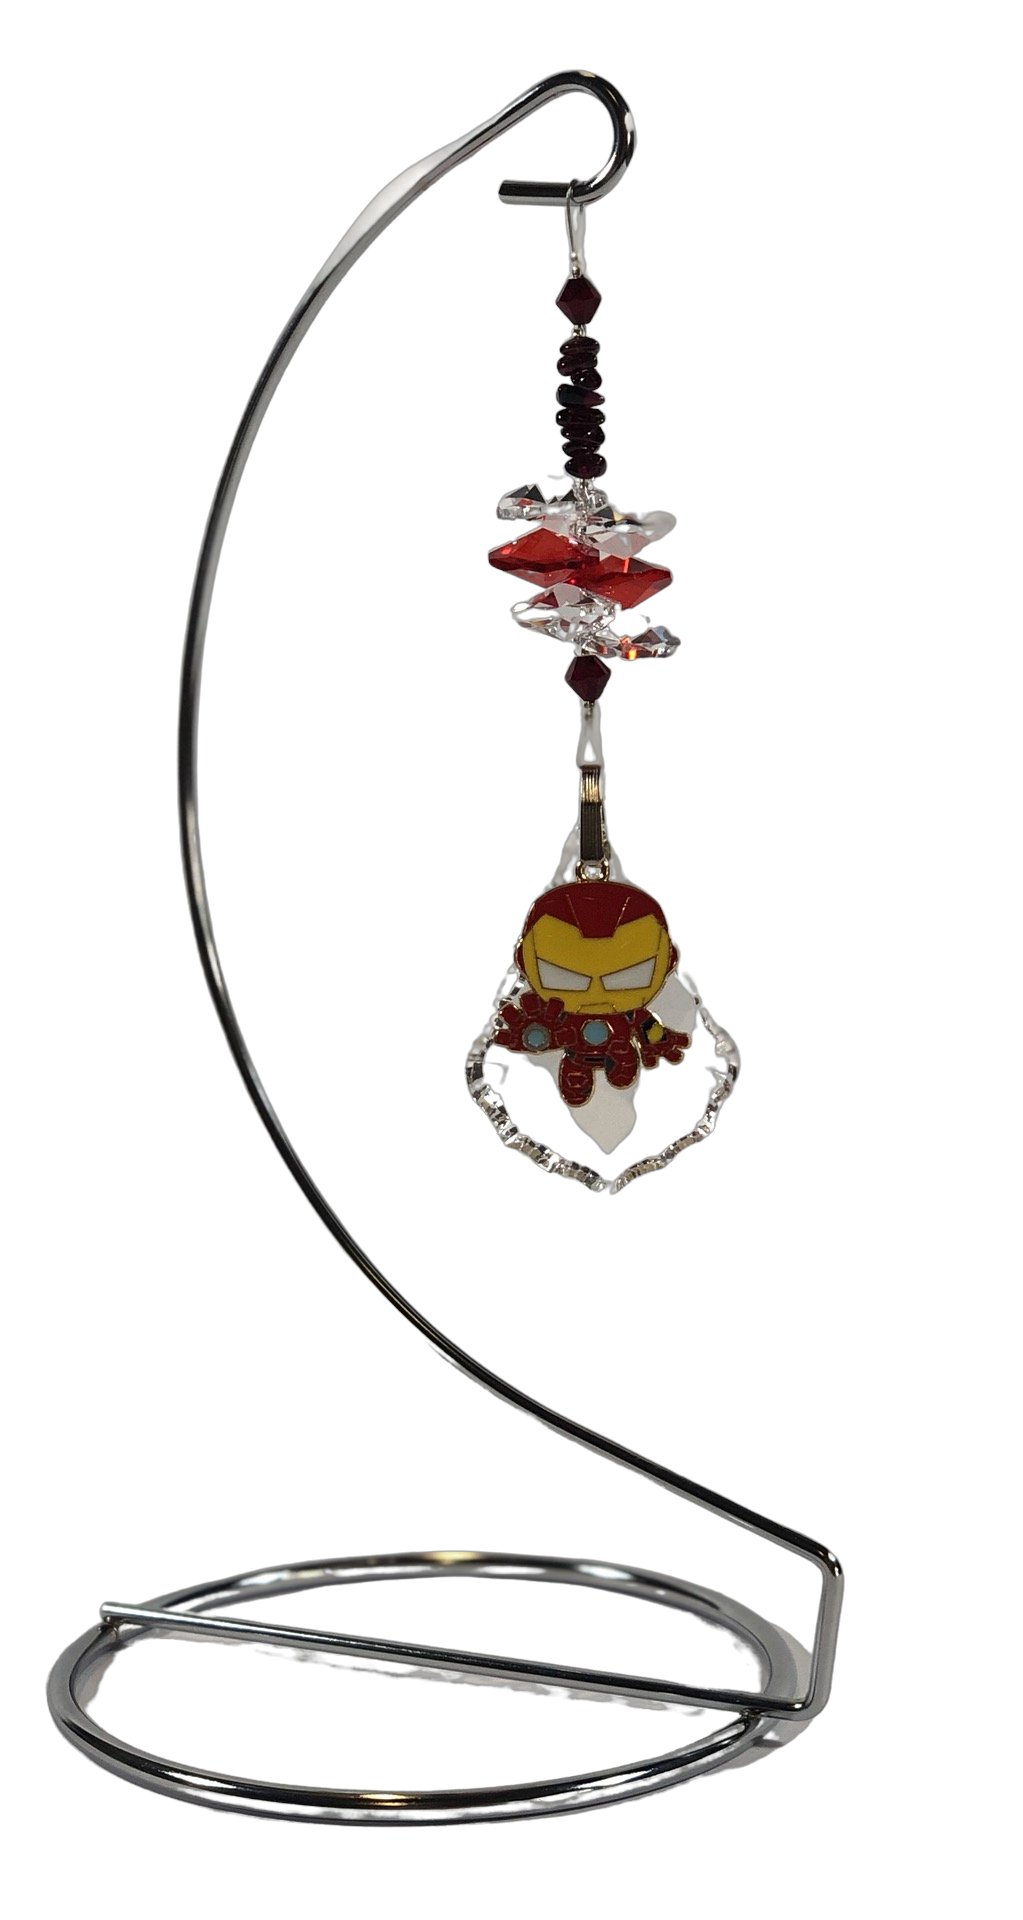 Iron-Man - Marvel crystal suncatcher is decorated with garnet gemstones and come on this amazing stand.